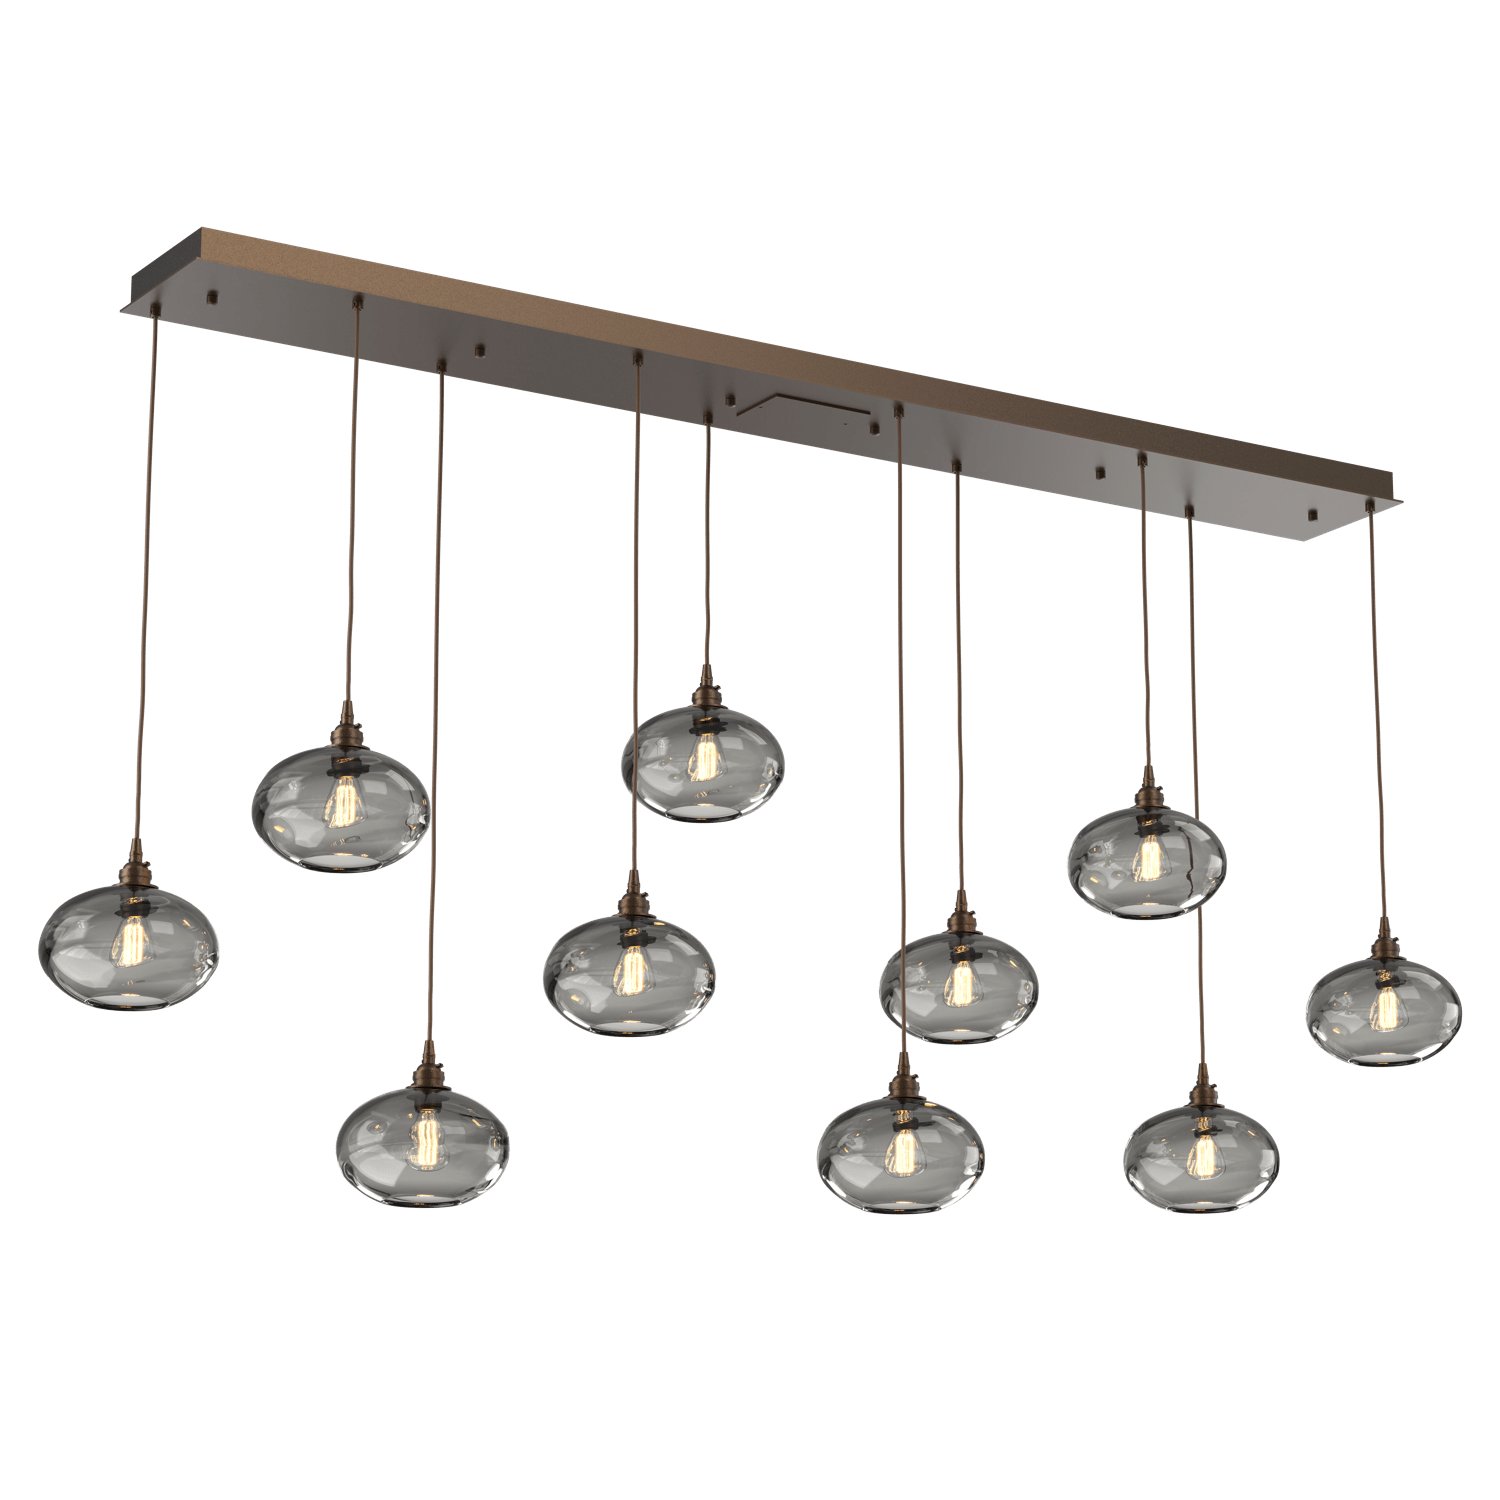 PLB0036-10-FB-OS-Hammerton-Studio-Optic-Blown-Glass-Coppa-10-light-linear-pendant-chandelier-with-flat-bronze-finish-and-optic-smoke-blown-glass-shades-and-incandescent-lamping